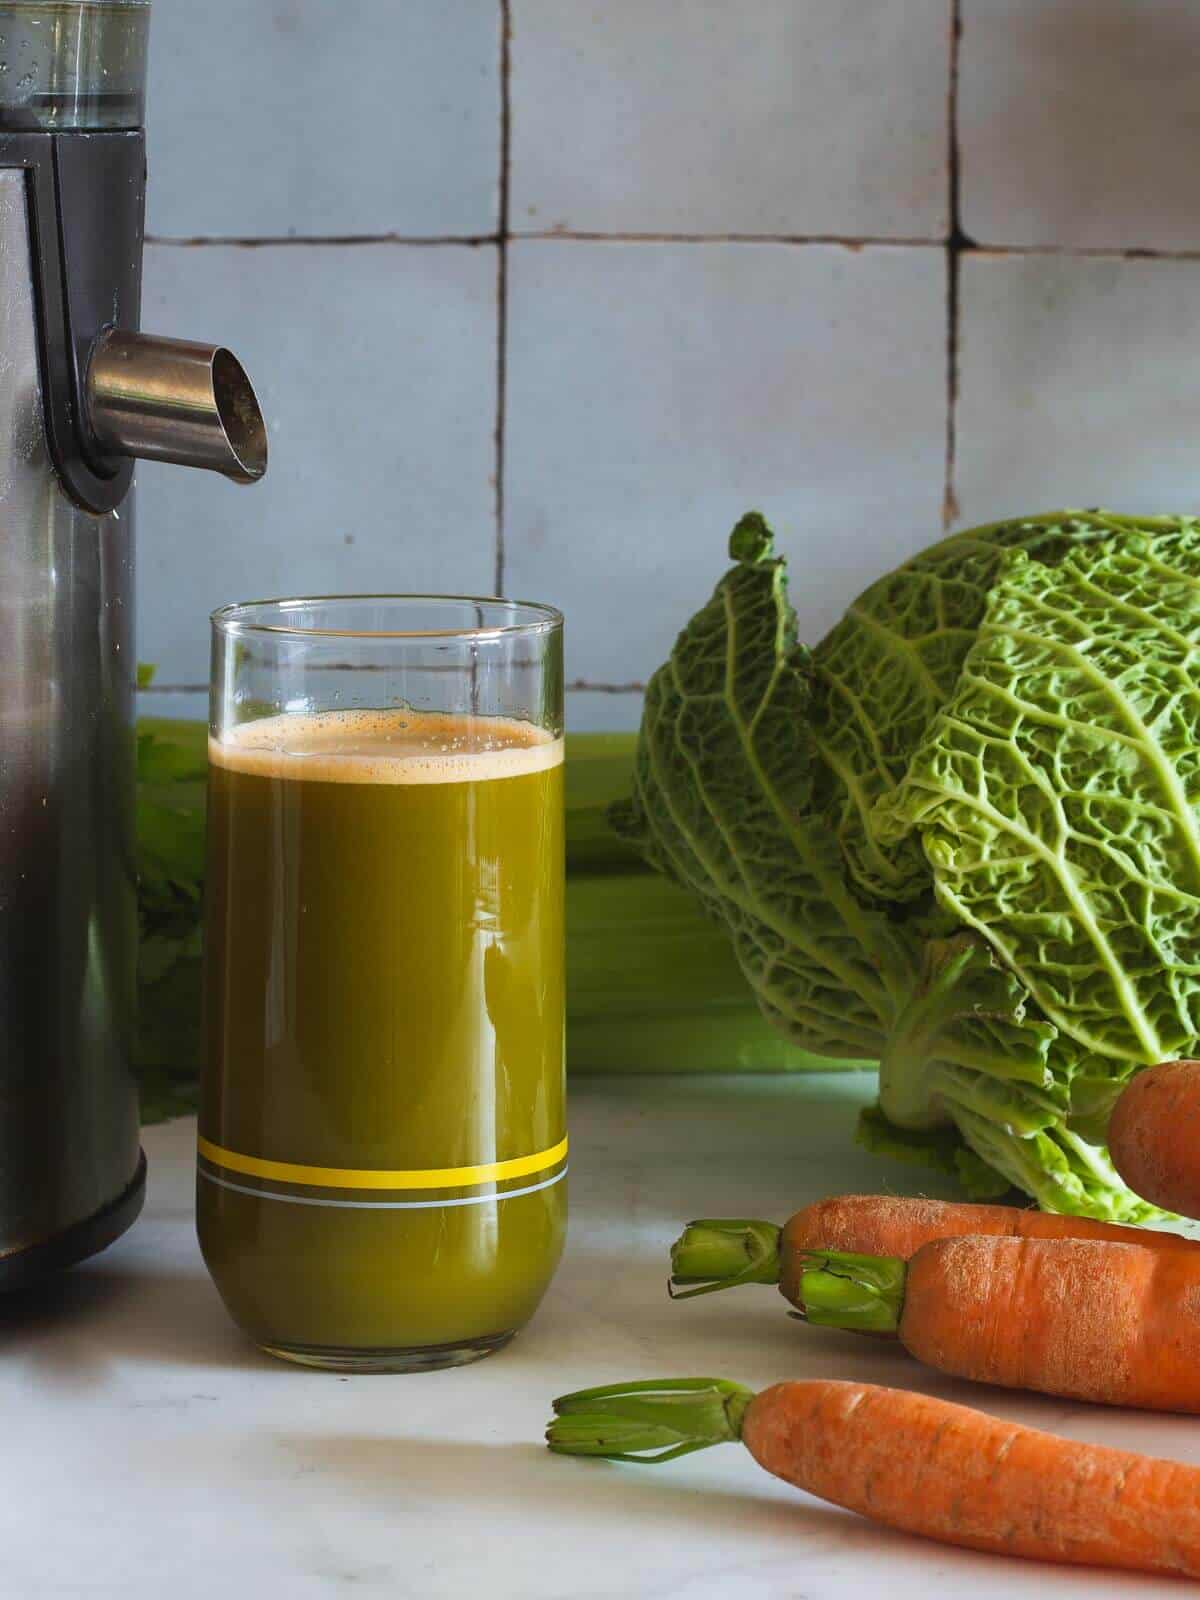 juicing carrots, cabbage, and celery.